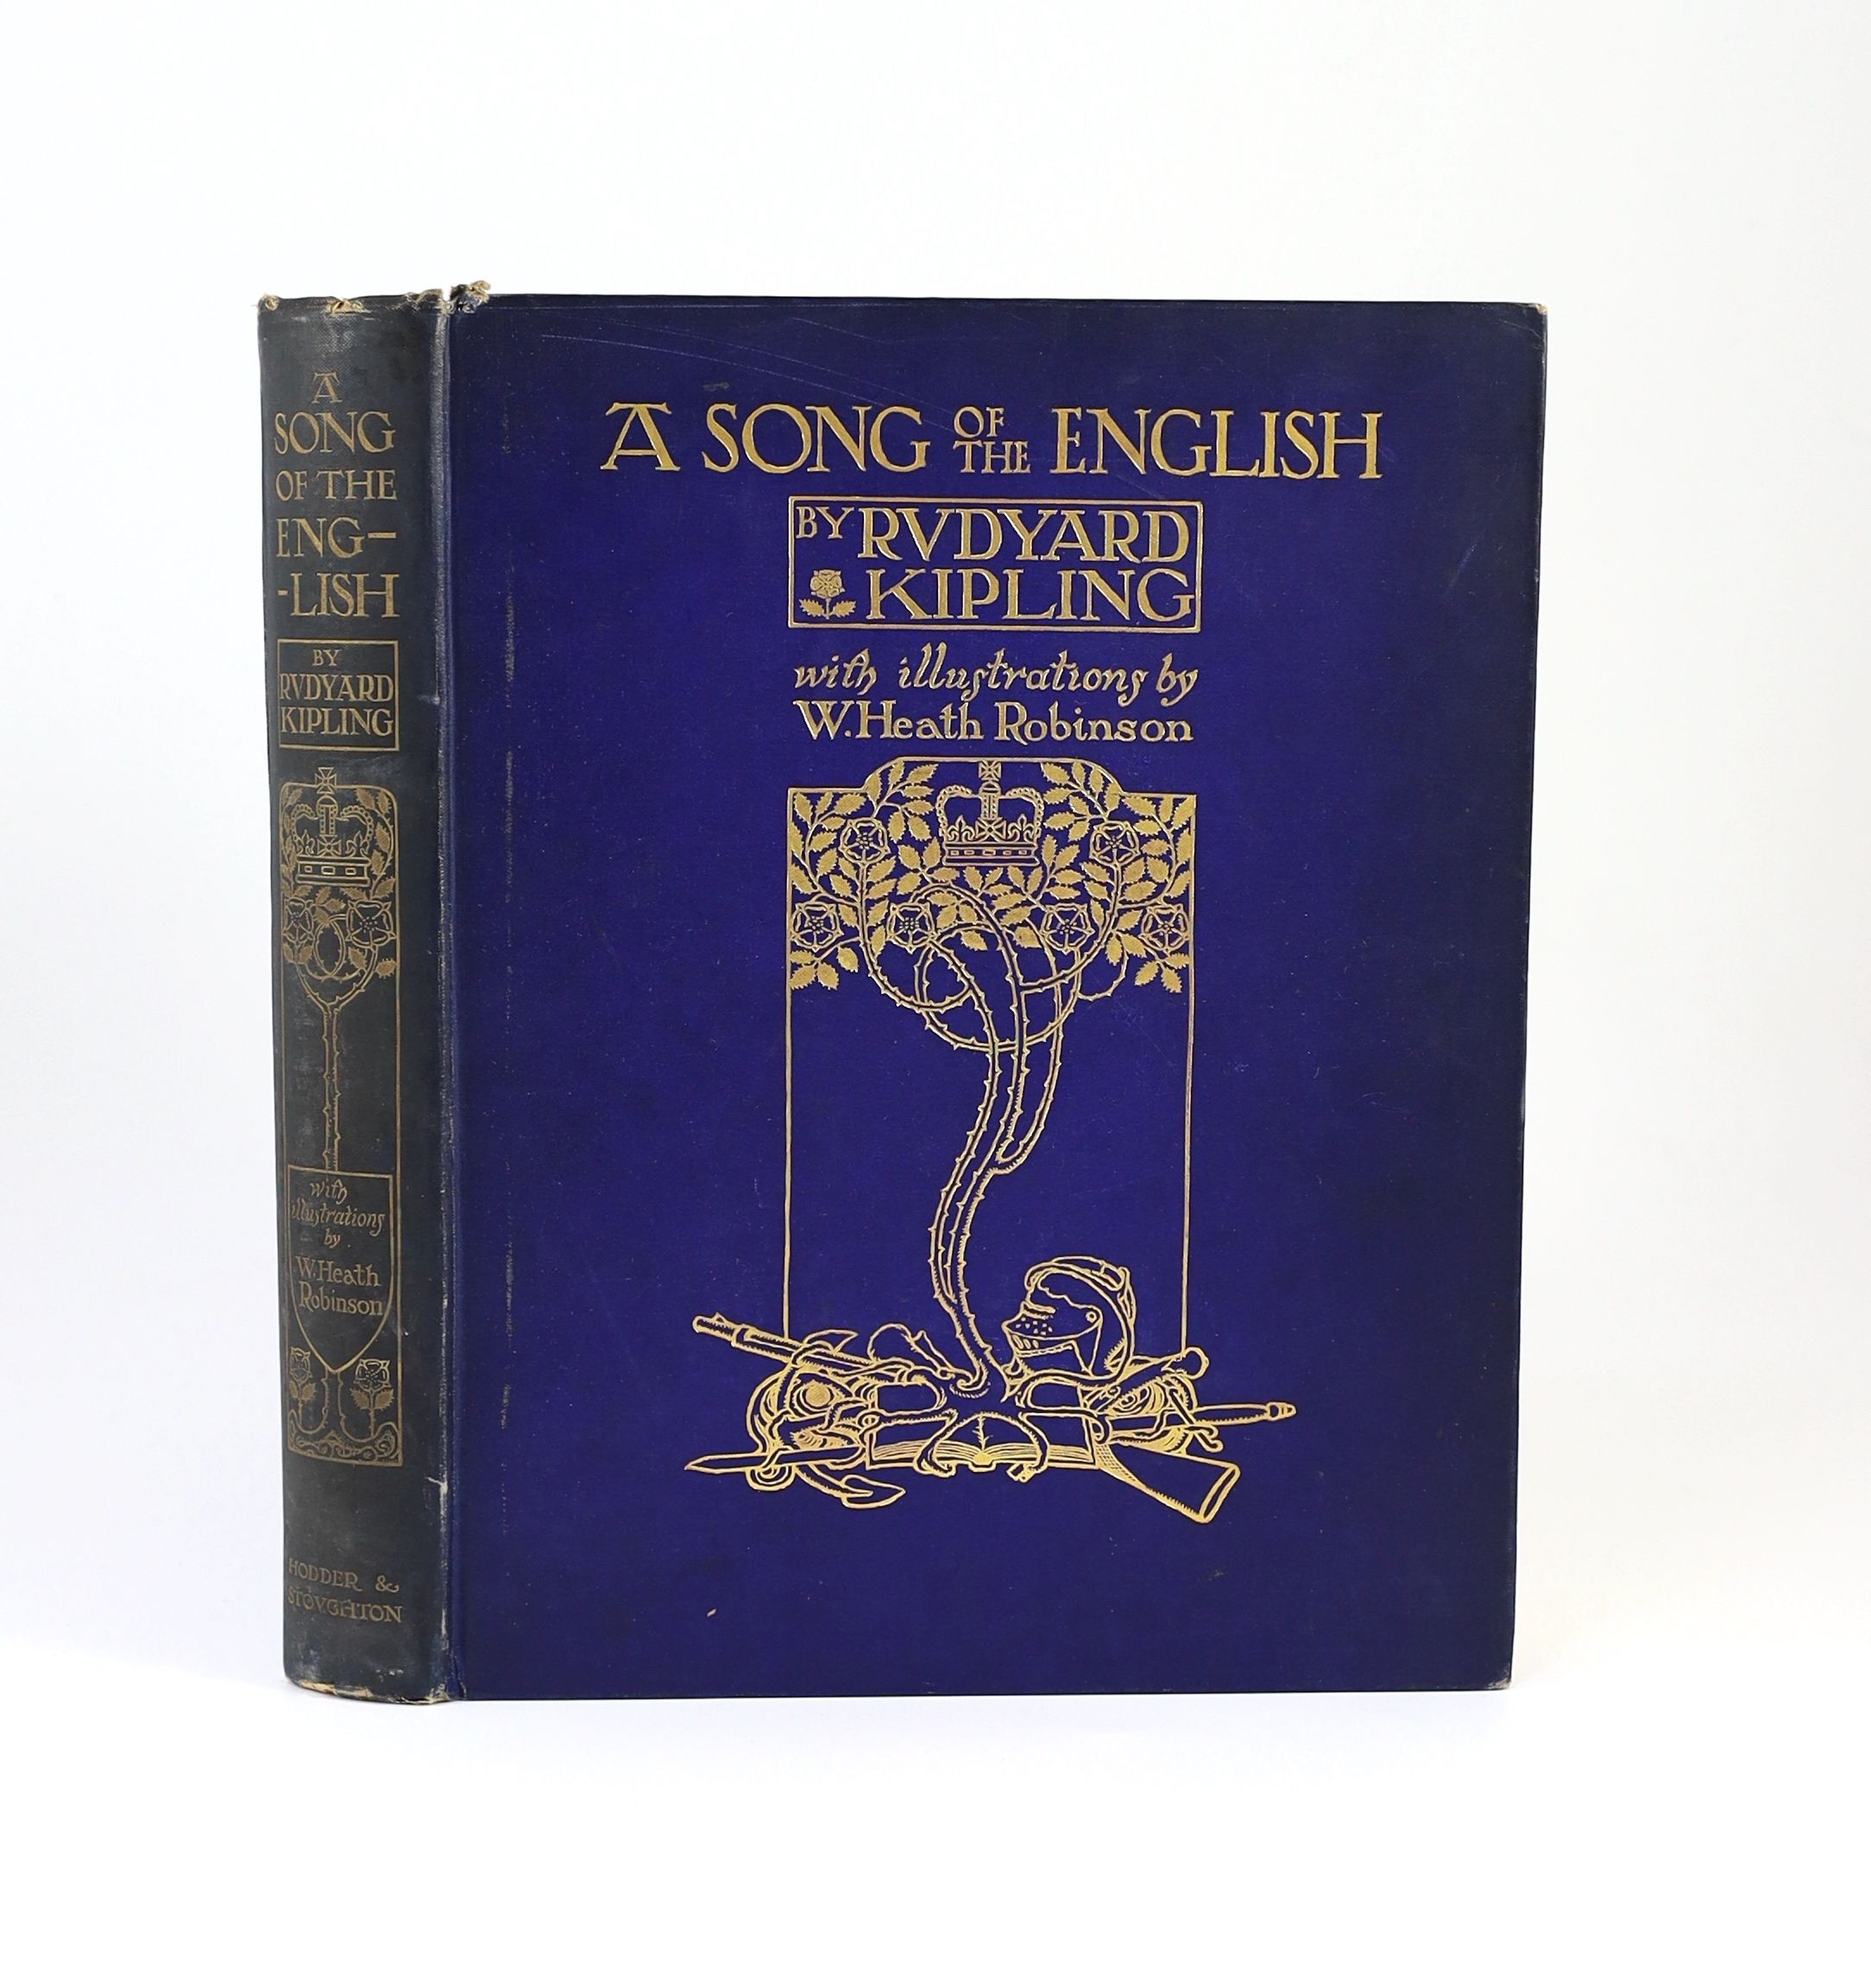 Kipling, Rudyard - A Song of the English, illustrated by W. Heath Robinson, 4to, cloth gilt, stamped - ‘’presentation copy’’, with 30 tipped-in colour plates, London, [1909]